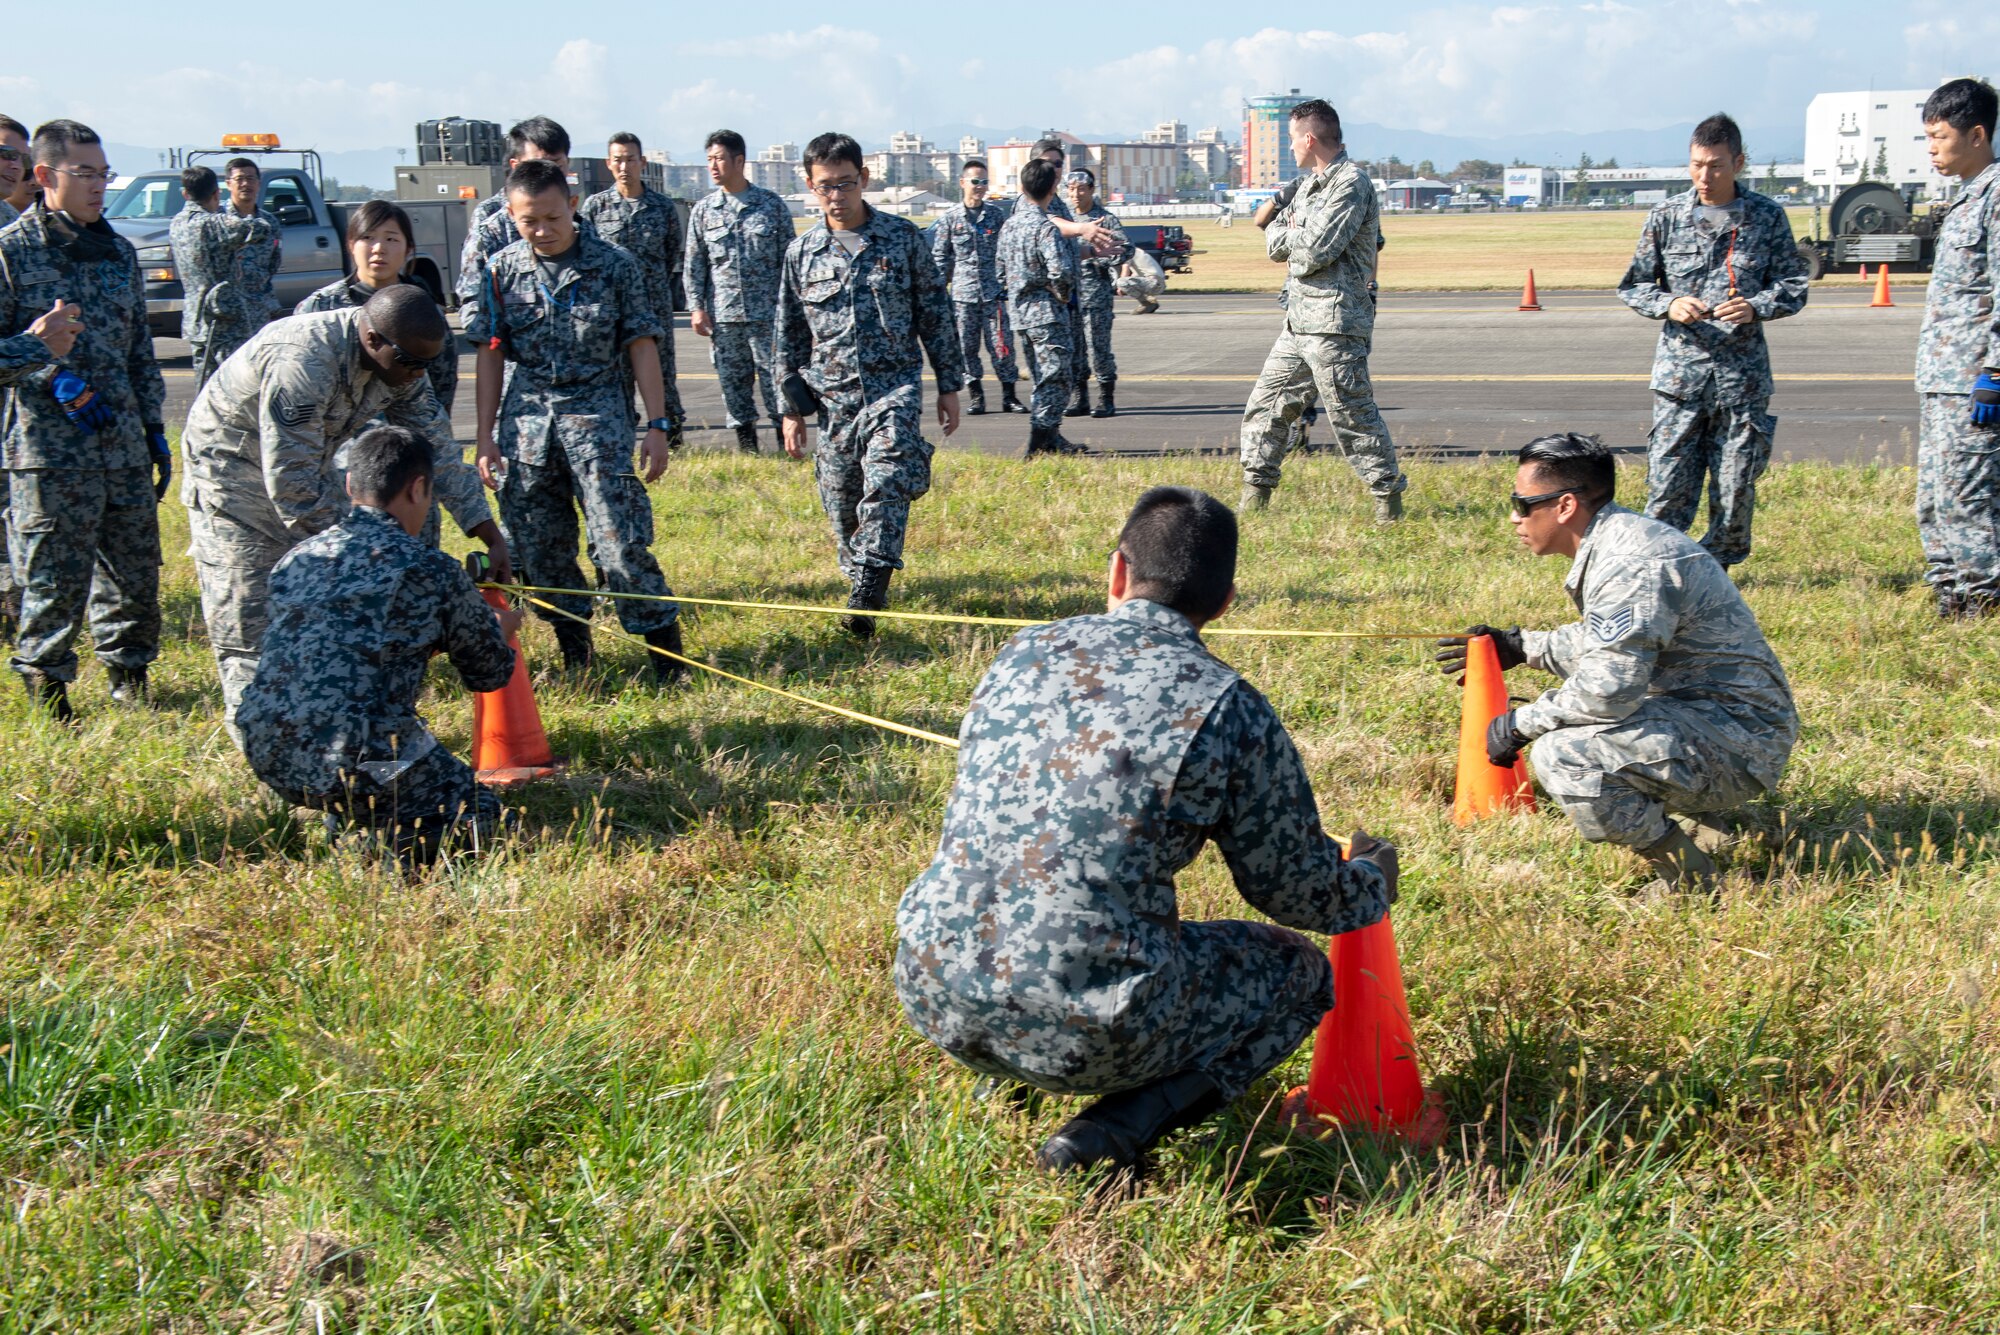 Airmen from the 374th Civil Engineer Squadron work with Koku Jietai (Japan Air Self-Defense Force) members to measure out the proper positioning for the Mobile Aircraft Arresting System (MAAS) at a bilateral training event at Yokota Air Base, Japan, Oct. 25, 2018.